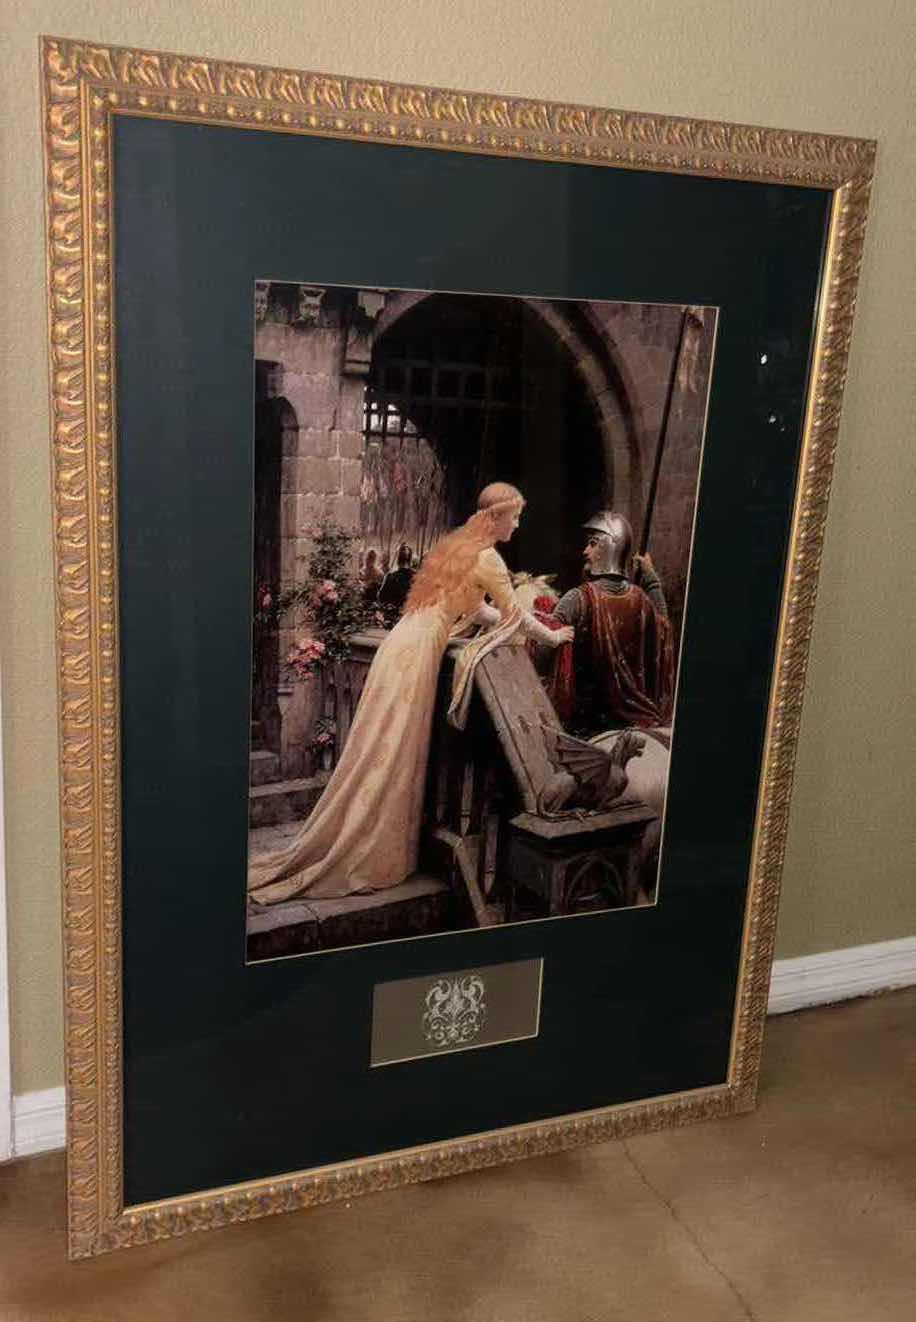 Photo 1 of FRAMED PRINT BY EDMUND BLAIR LEIGHTON, “GOD SPEED” 34” x 46.25” (GLASS INCLUDED)